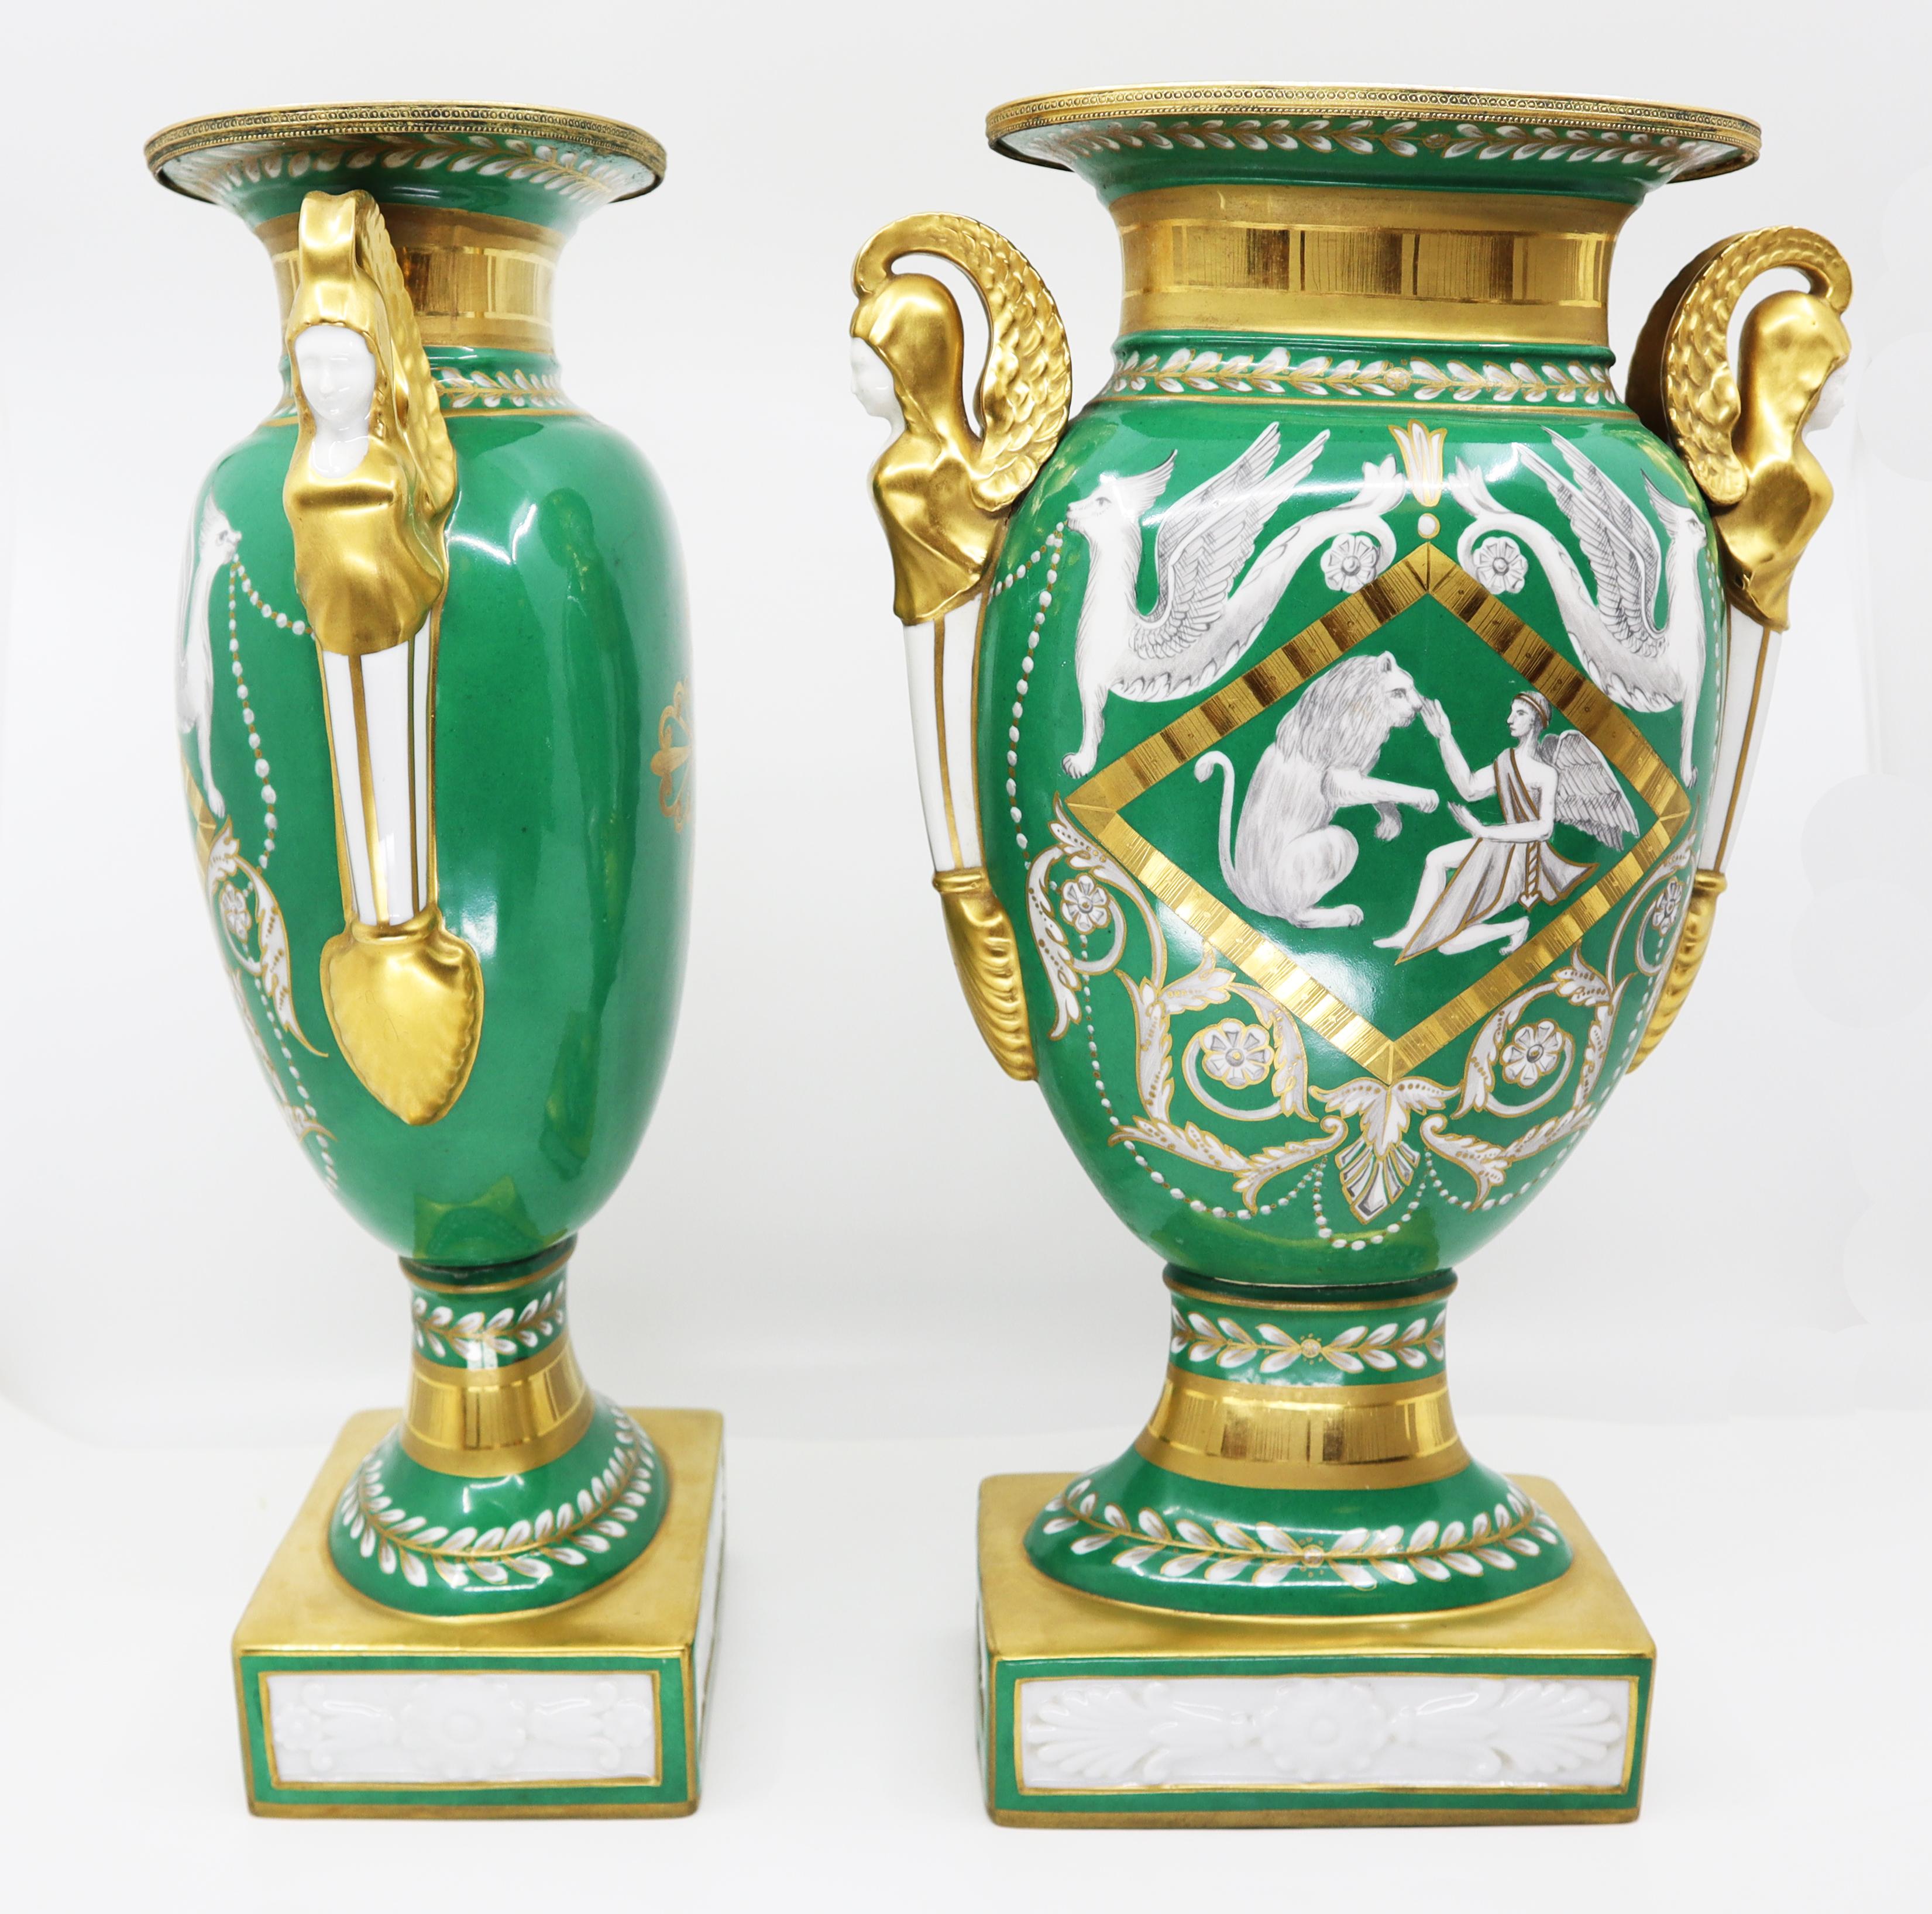 Pair of vases, Empire style, 19th century, Paris
Decorated with neoclassical design pattern in white and gold against a green background
Dimensions: 40 H x 20 W x 12cm (Approx).
 
Shipping included 
Free and fast delivery door to door by